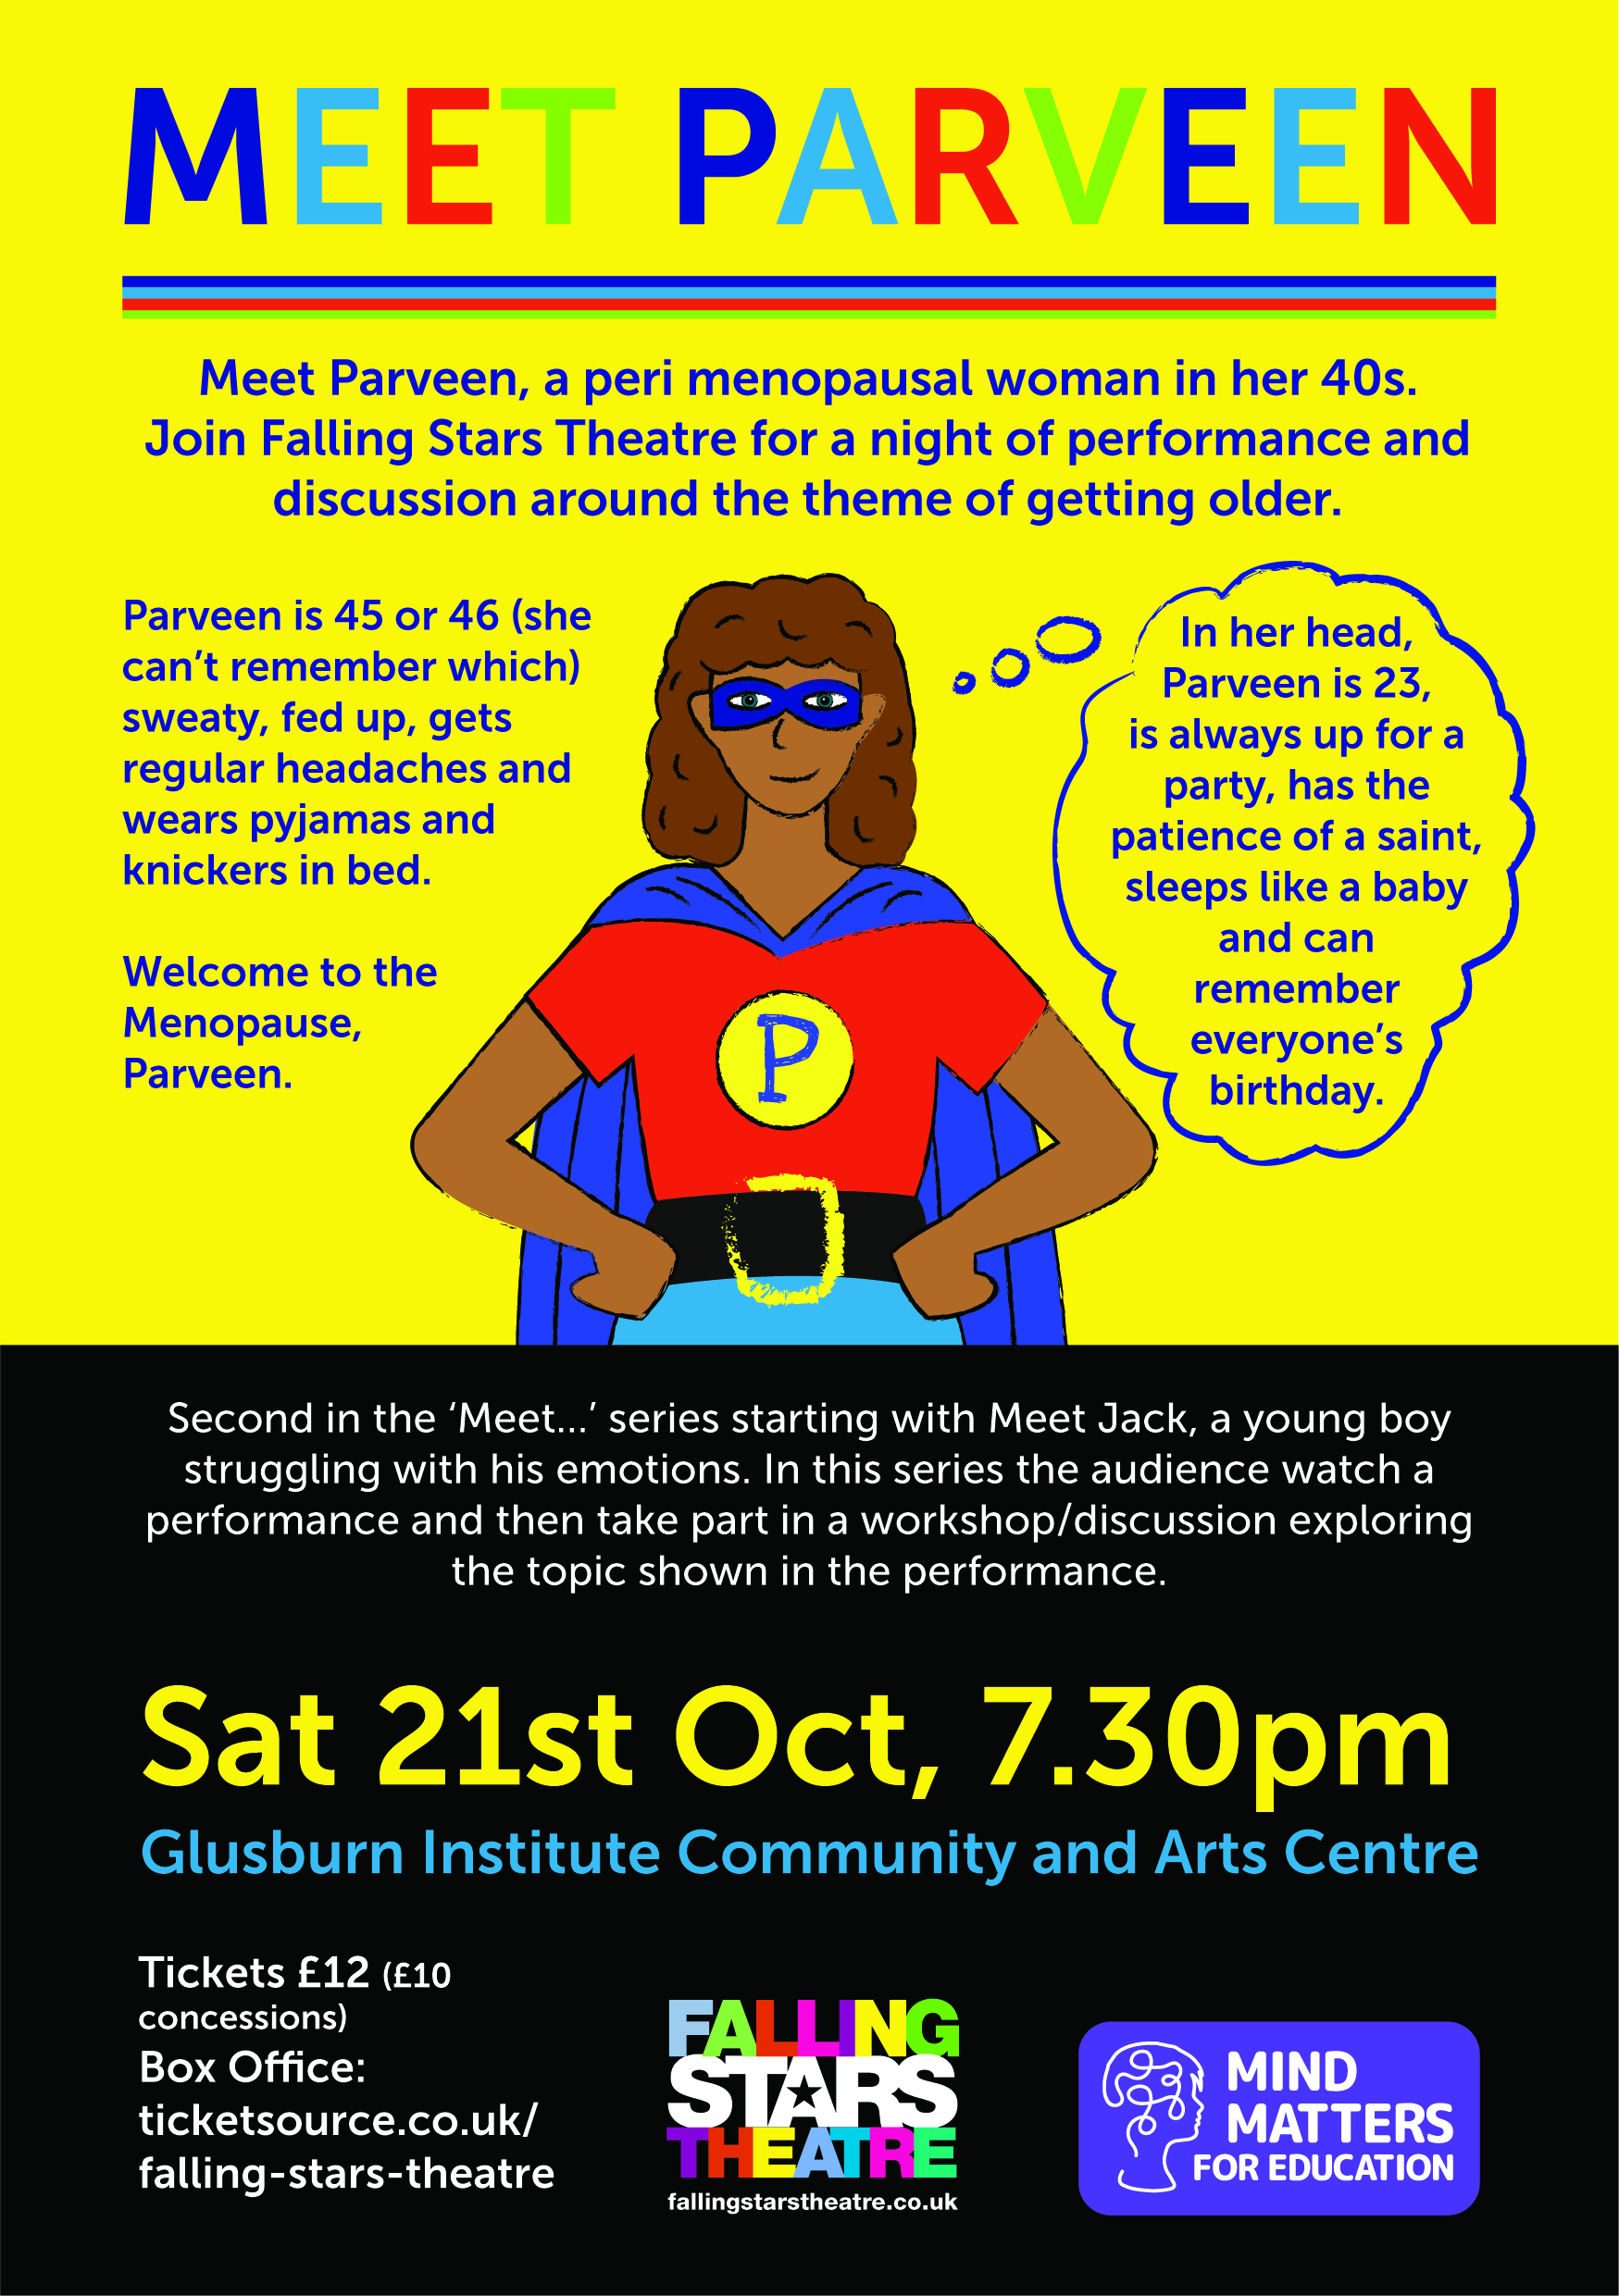 Meet Parveen, a peri menopausal woman in her 40s. Join Falling Stars Theatre for a play/post show discussion exploring the triumphs and tribulations of getting older. Saturday 21st October, 7.30pm at Glusburn Institute Community & Arts Centre, Glusburn.